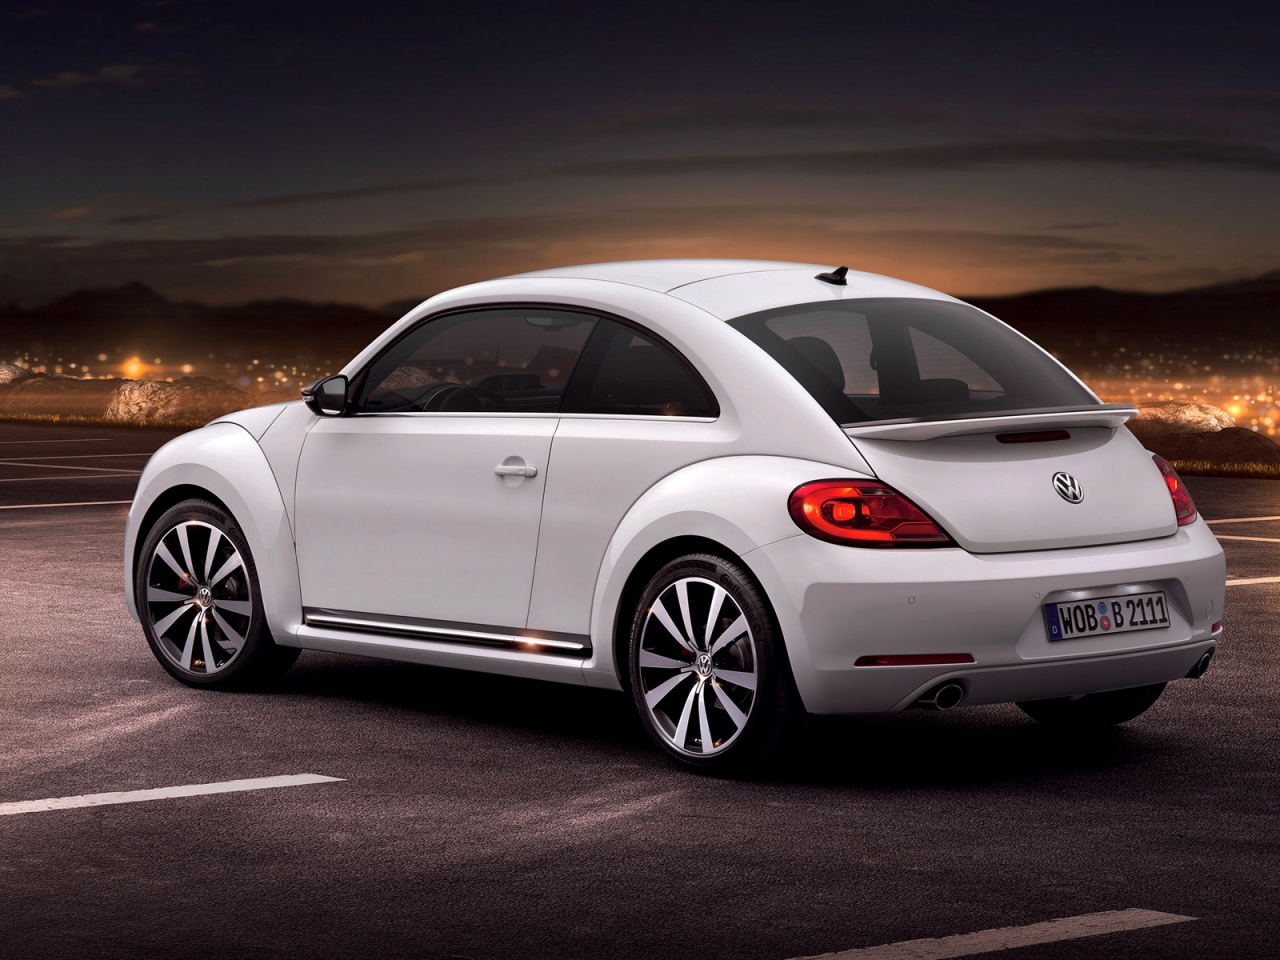 2012 VW Beetle for 1280 x 960 resolution